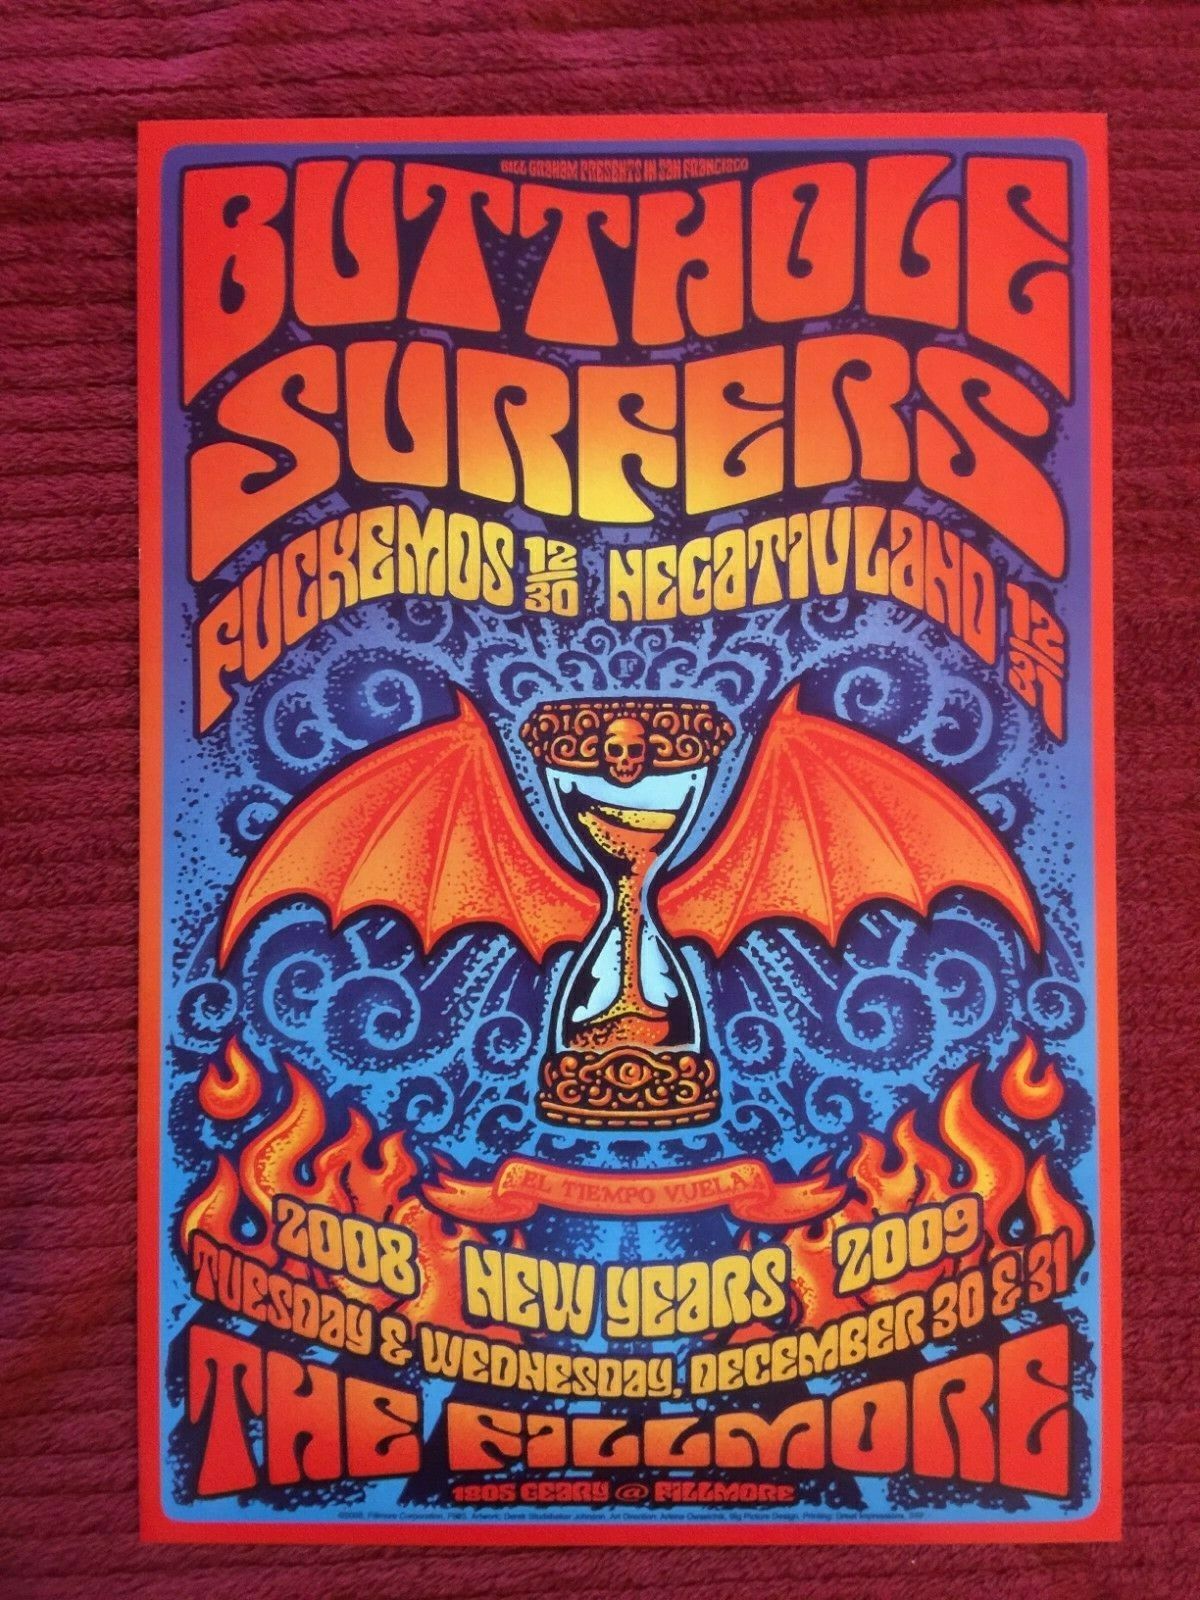 Butthole Surfers Sf 08 Johnson Poster